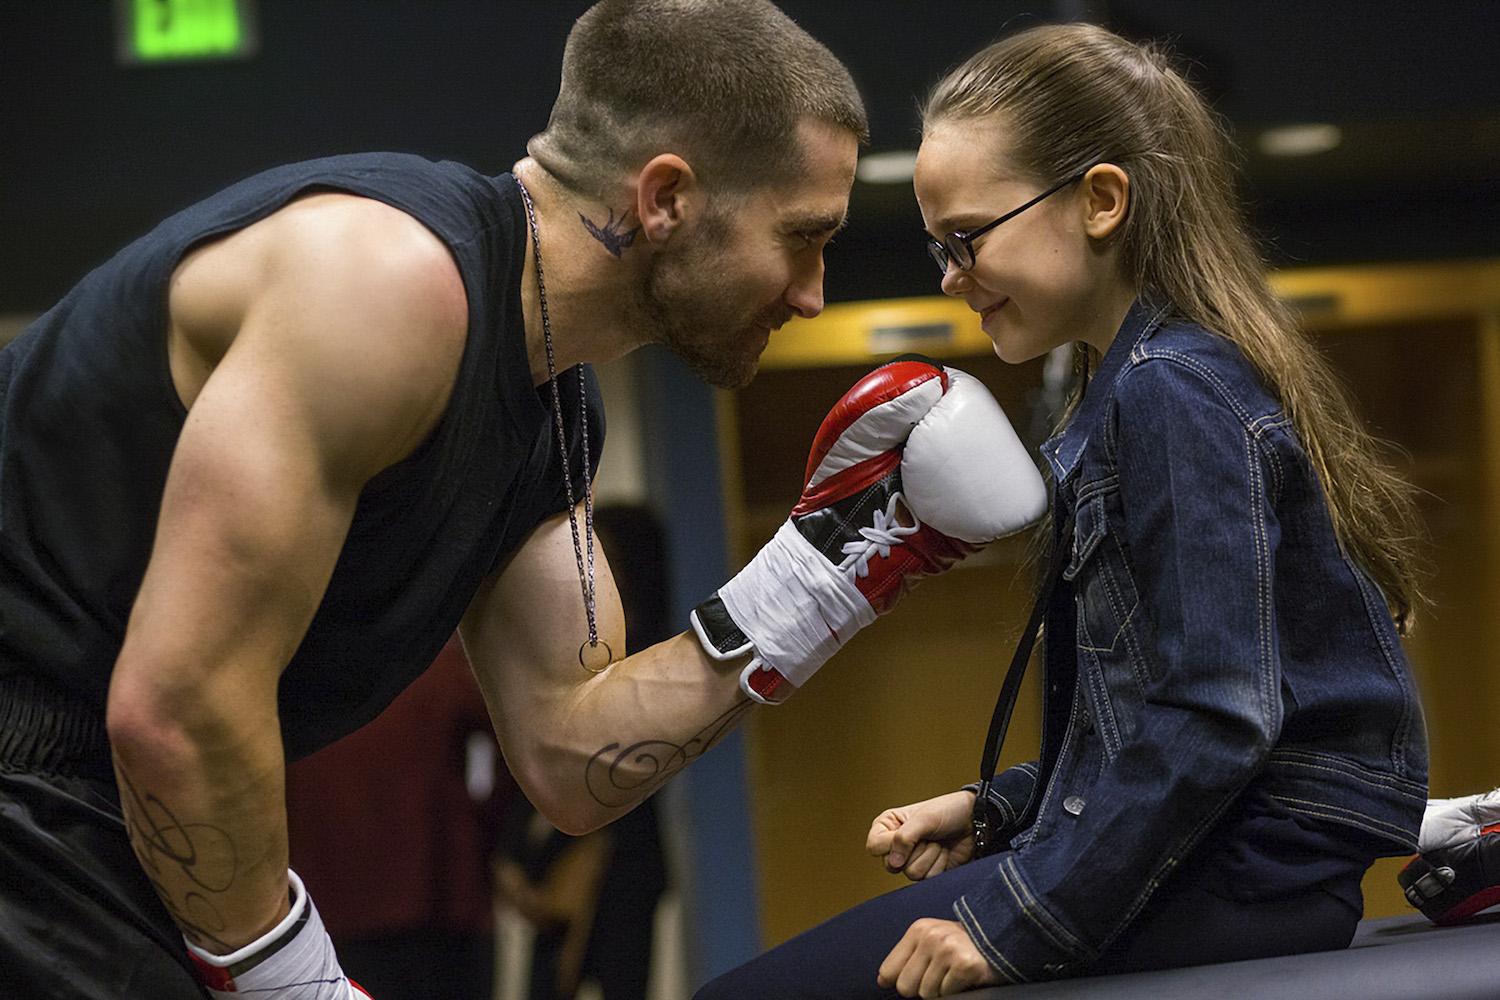 This Week In Movies: ‘Southpaw,’ ‘Paper Towns,’ ‘Pixels’